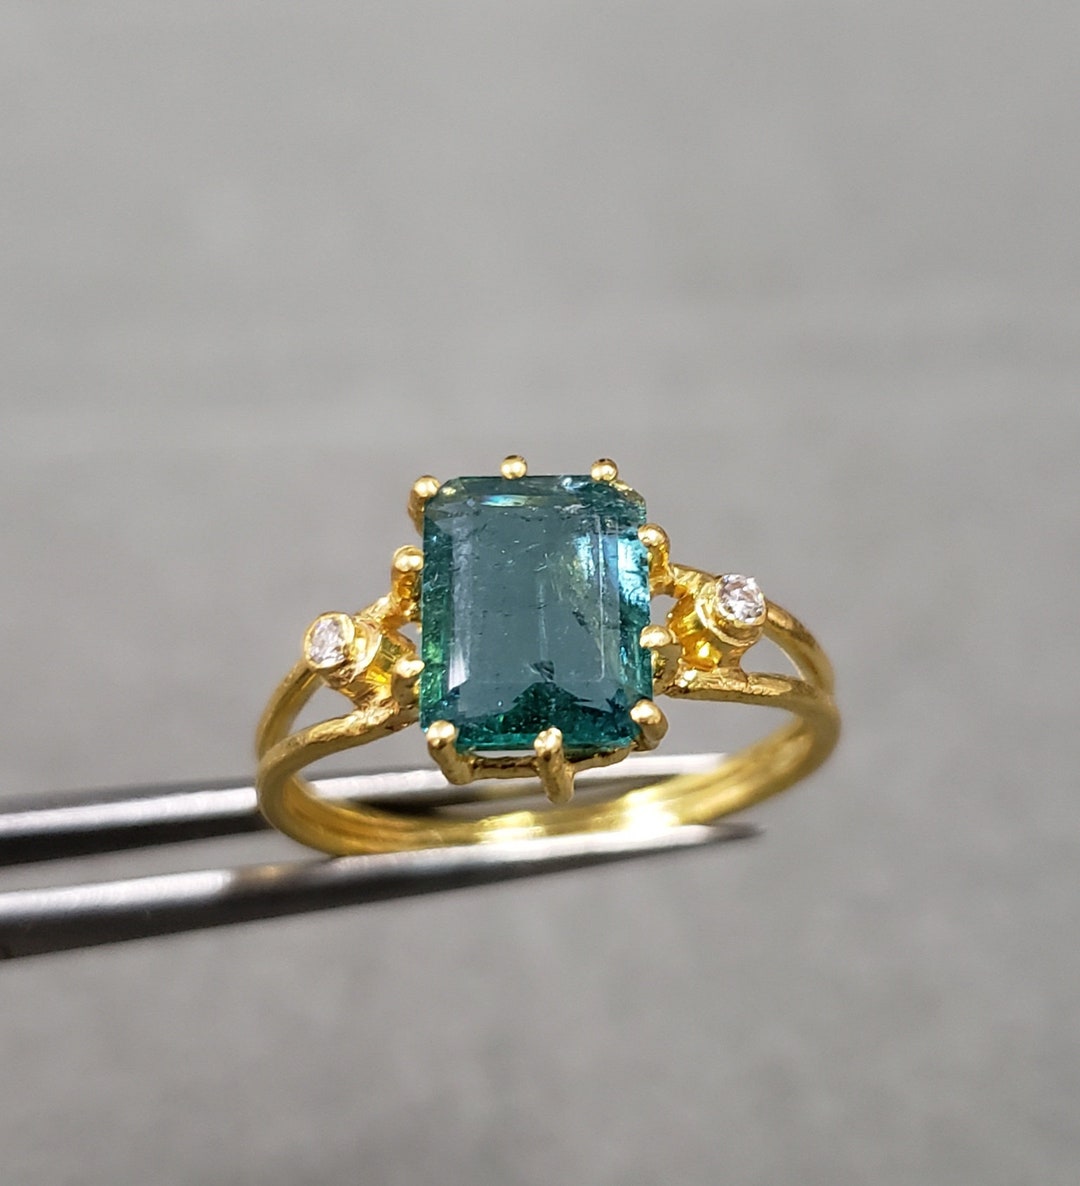 Brilliant Cut Diamond and Emerald 18k Gold Ring Double Stack - Etsy